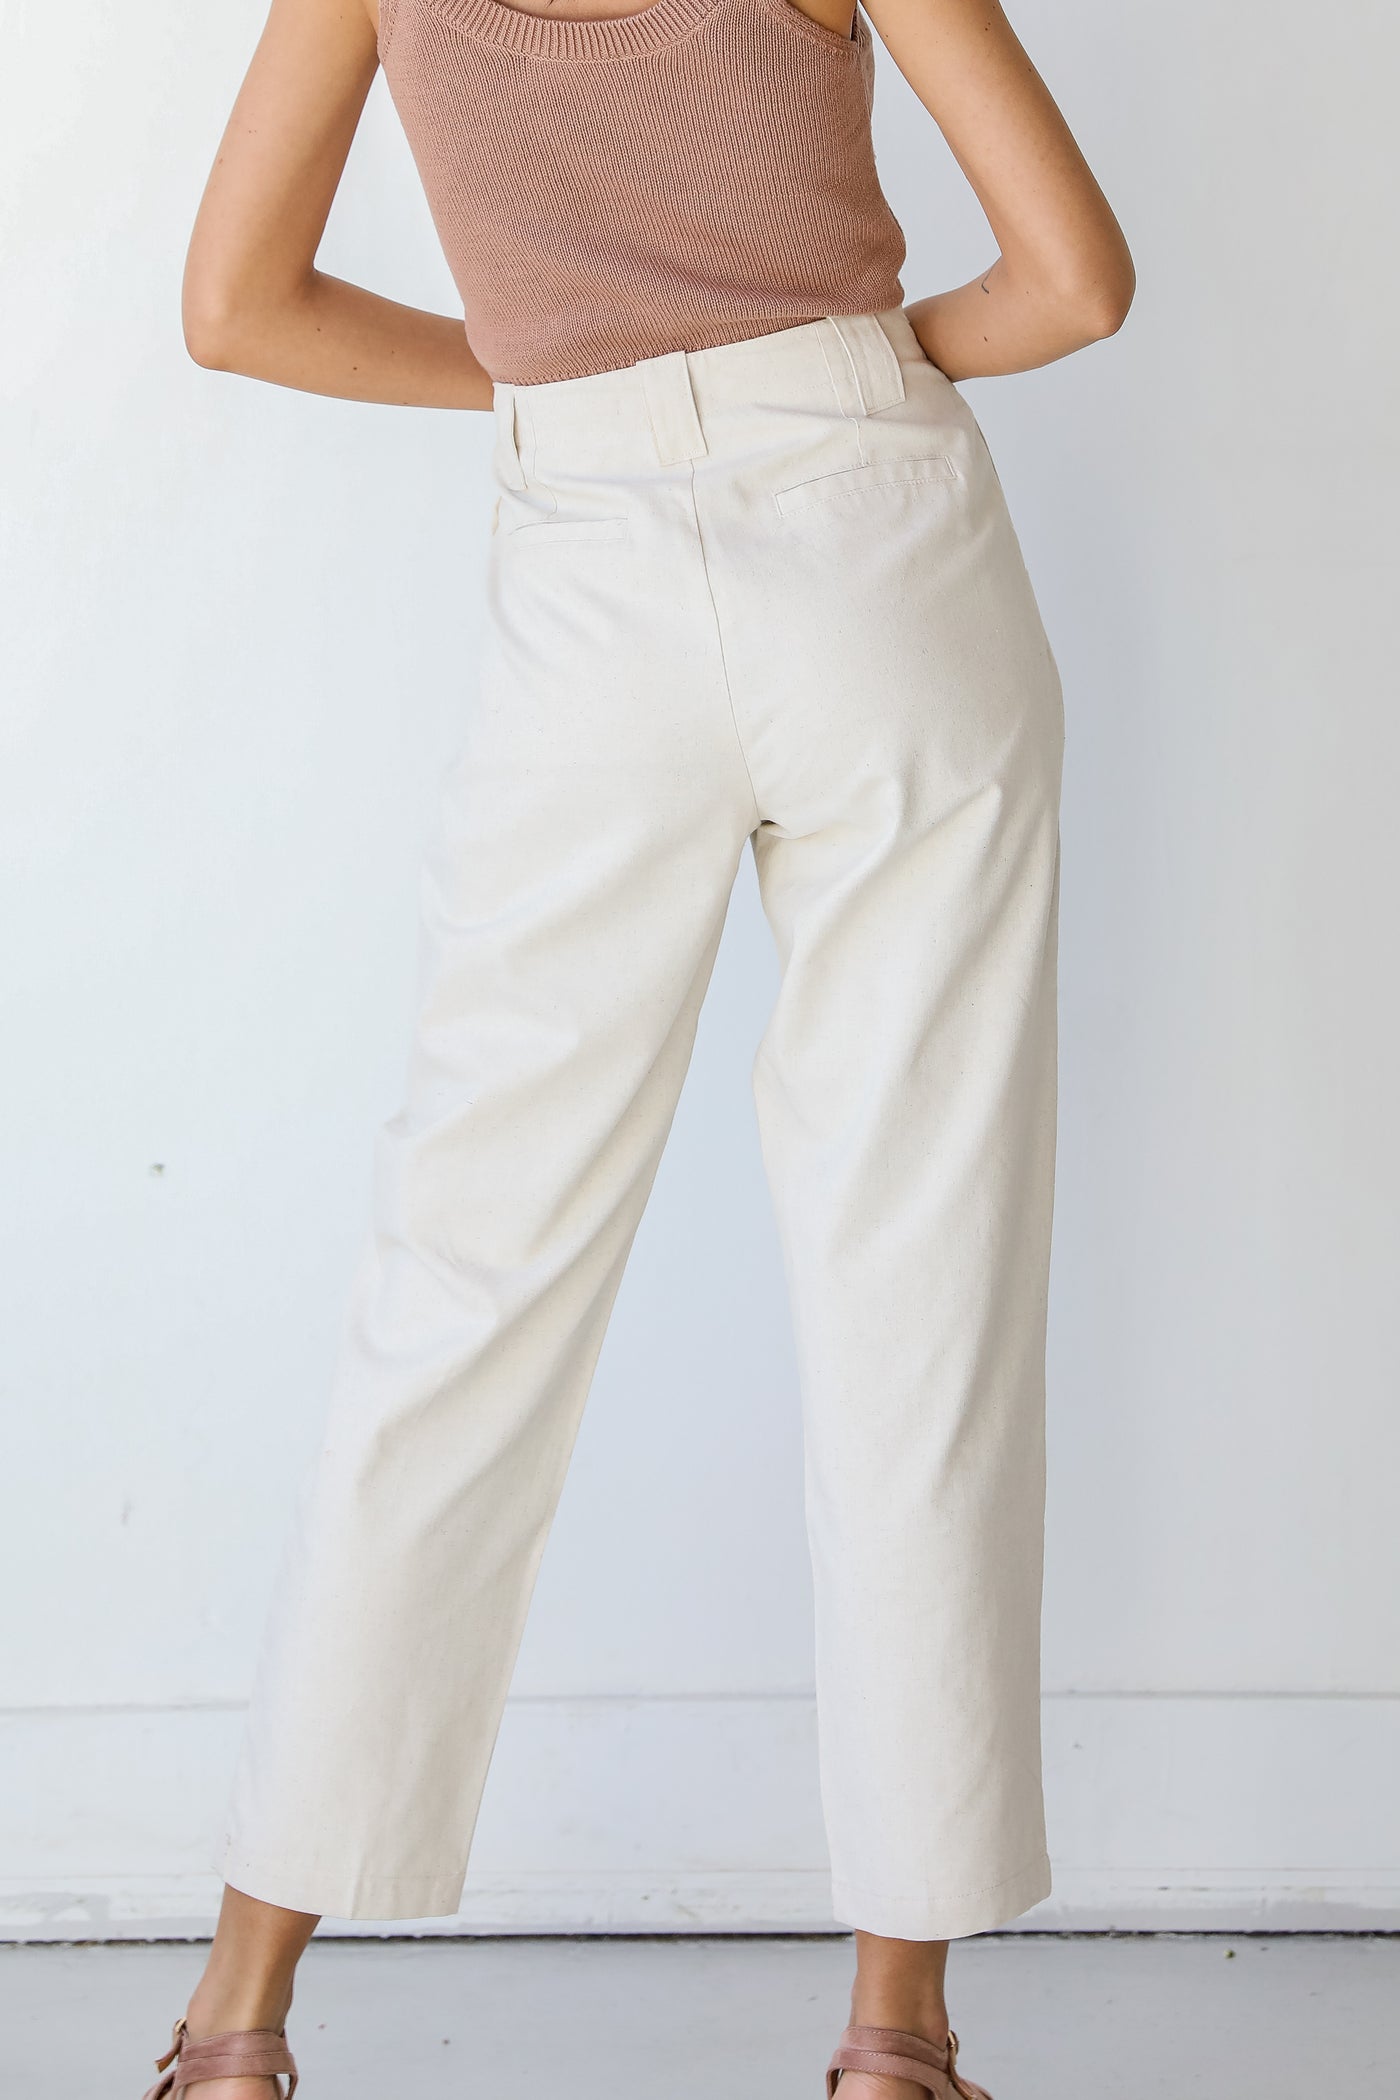 Linen Pants in ivory back view